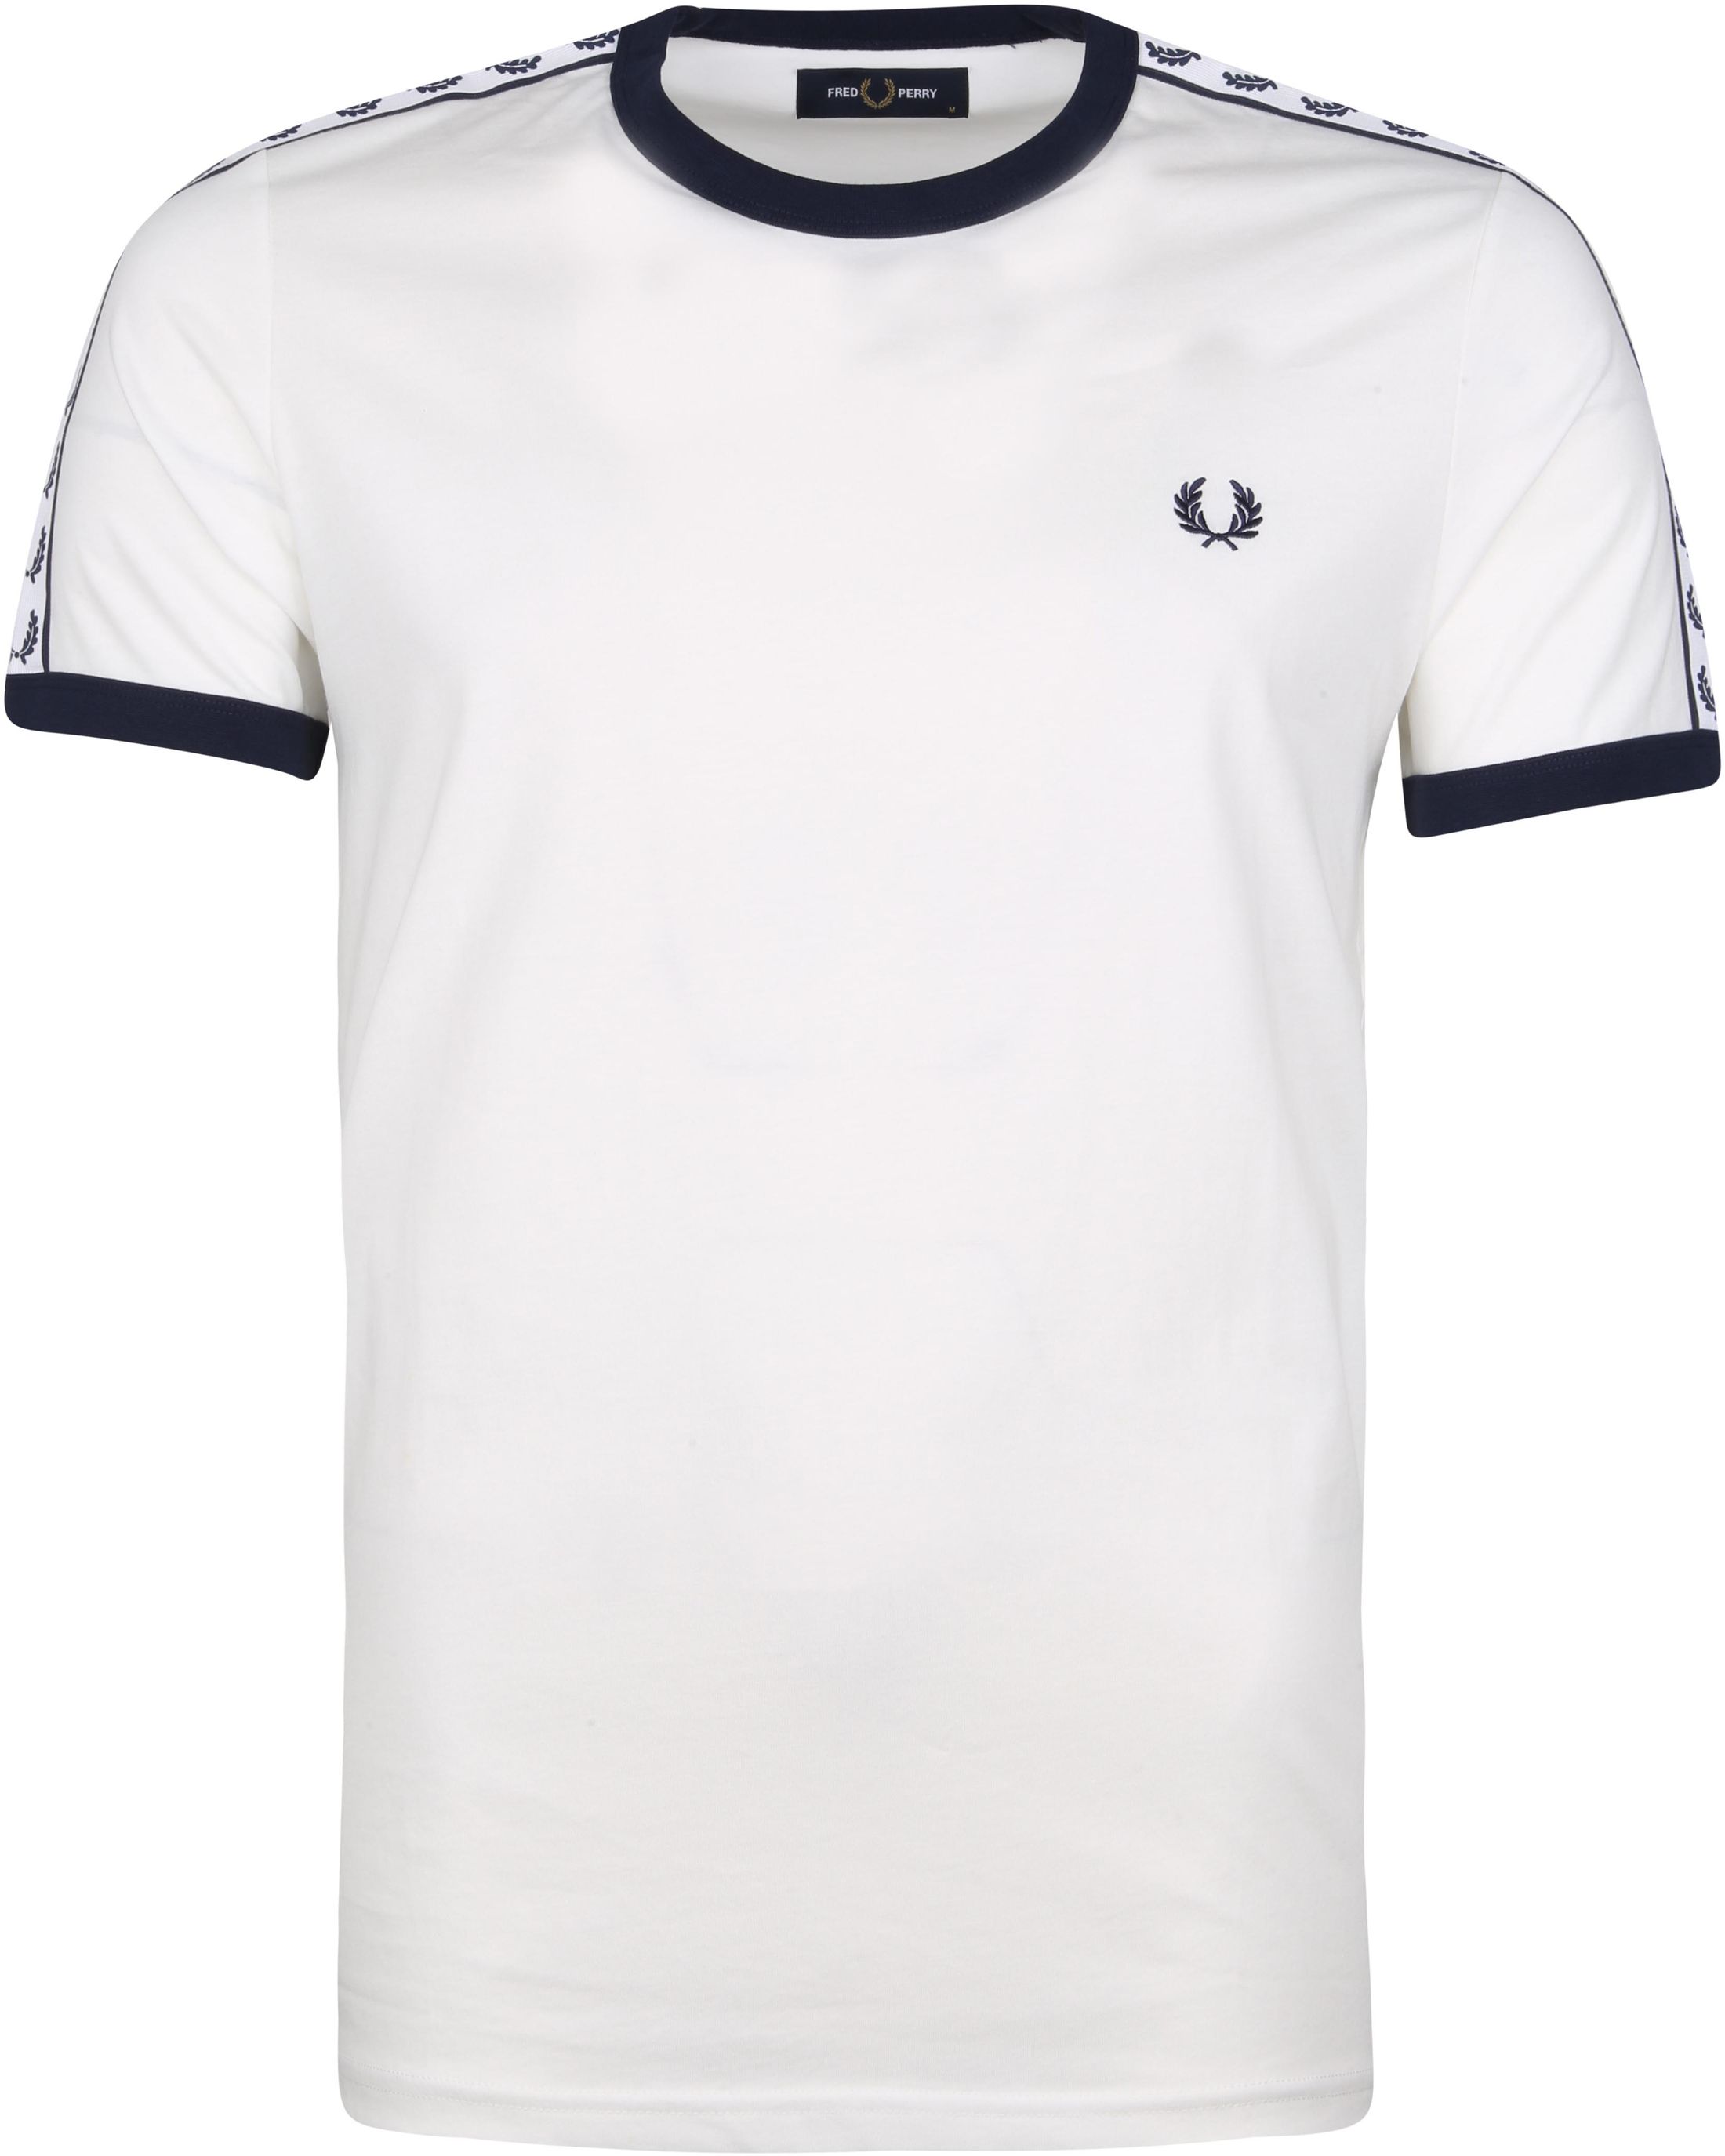 Fred Perry T-Shirt  M6347 White size M